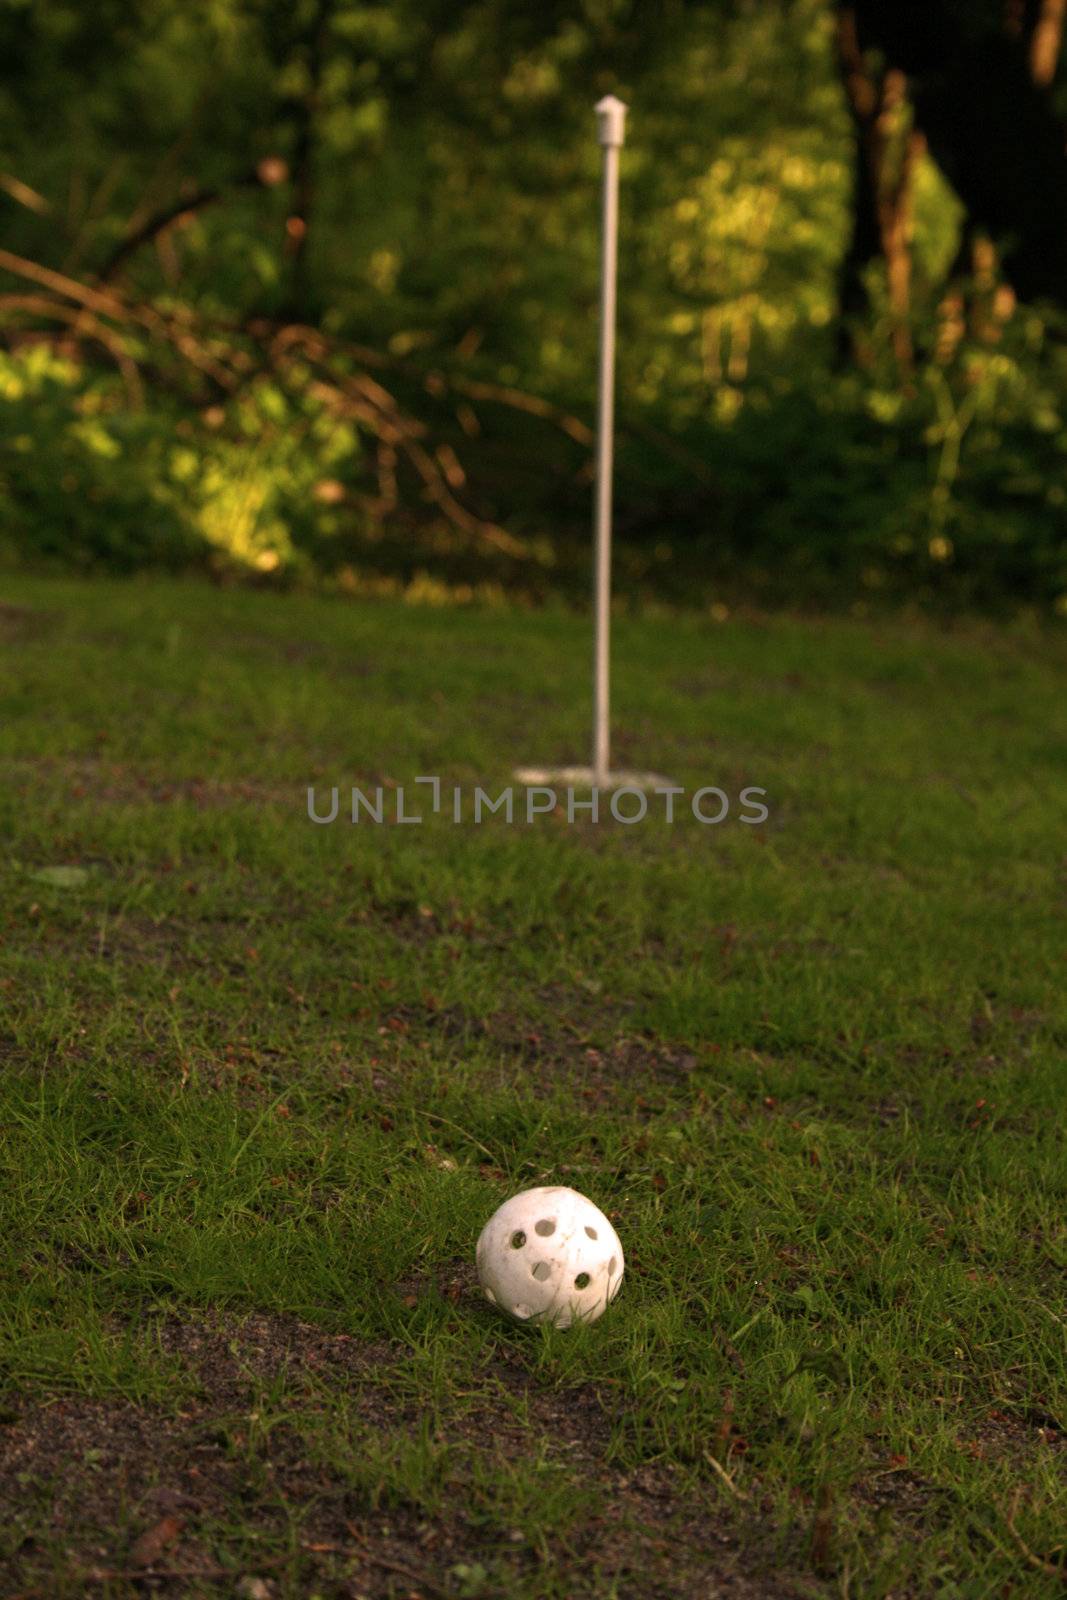 a trainee`s golf ball aiming for the hole